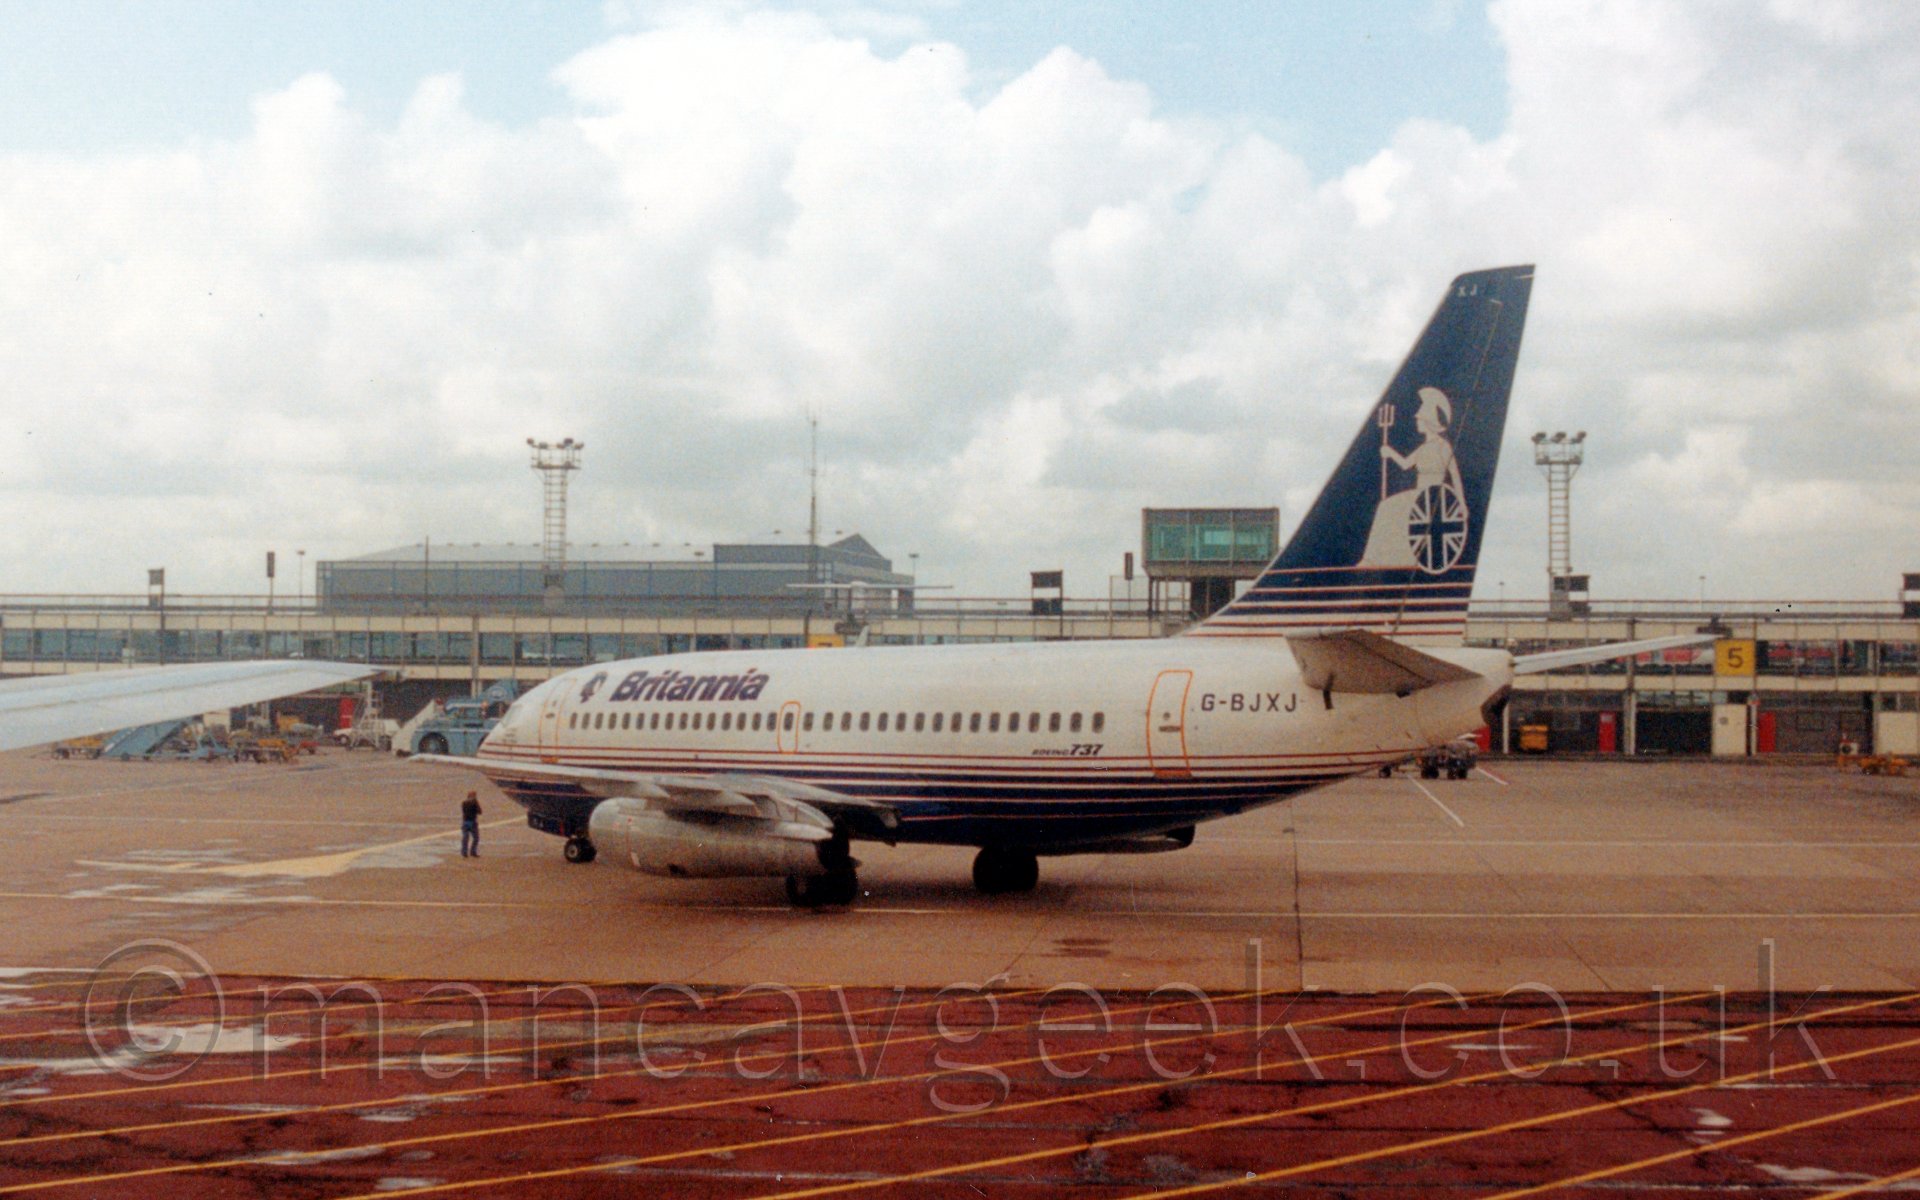 Side view of a twin engined jet airliner being pushed back from it's stand at an airport. The plane's body is mostly white, with a blue belly and blue stripes on the lower fuselage, with blue "Britannia" titles on the upper forward fuselage. The tail is mostly blue with white stripes at the bottom, with an image of a seated Britannia. In the background, one of the airport piers stretches from one side of the frame to the other, with a large grey hangar on the left, while above, fluffy grey clouds are giving way to blue.